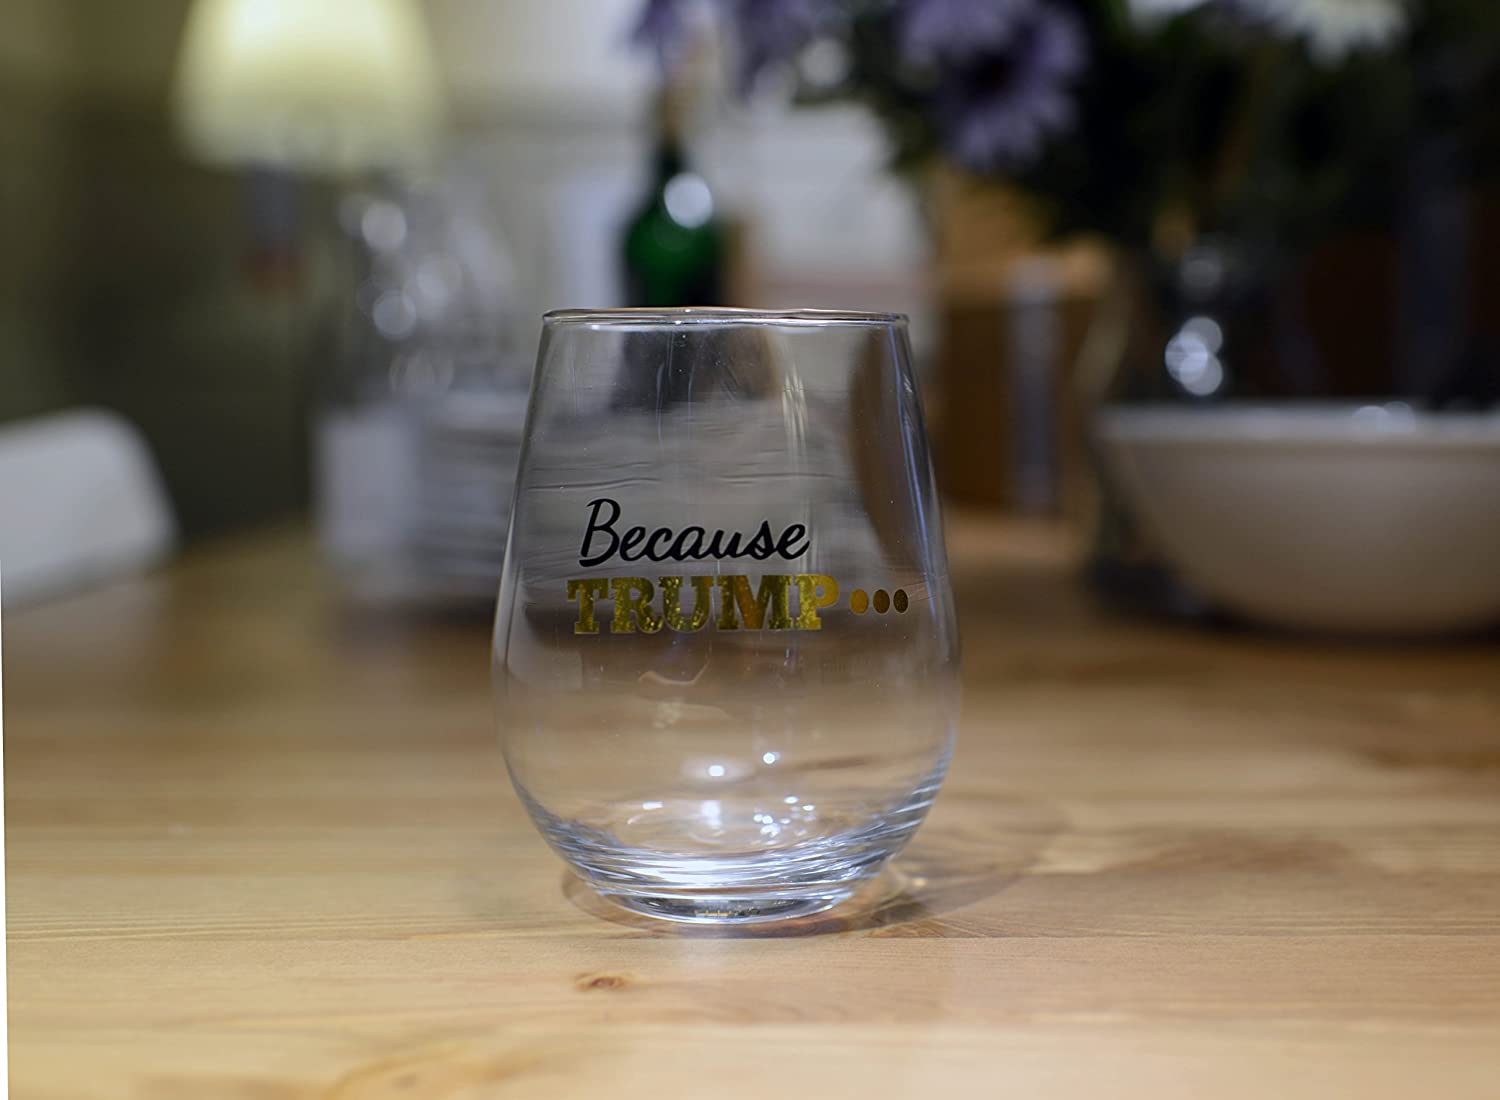 Because Trump 22 oz Stemless Wine Glass, Anti Trump Funny Gag Gift, White Elephant Gift, Gift for Feminists, Democrats & All Your Friends Gift for Birthday, Christmas, Independent Day, Retirement